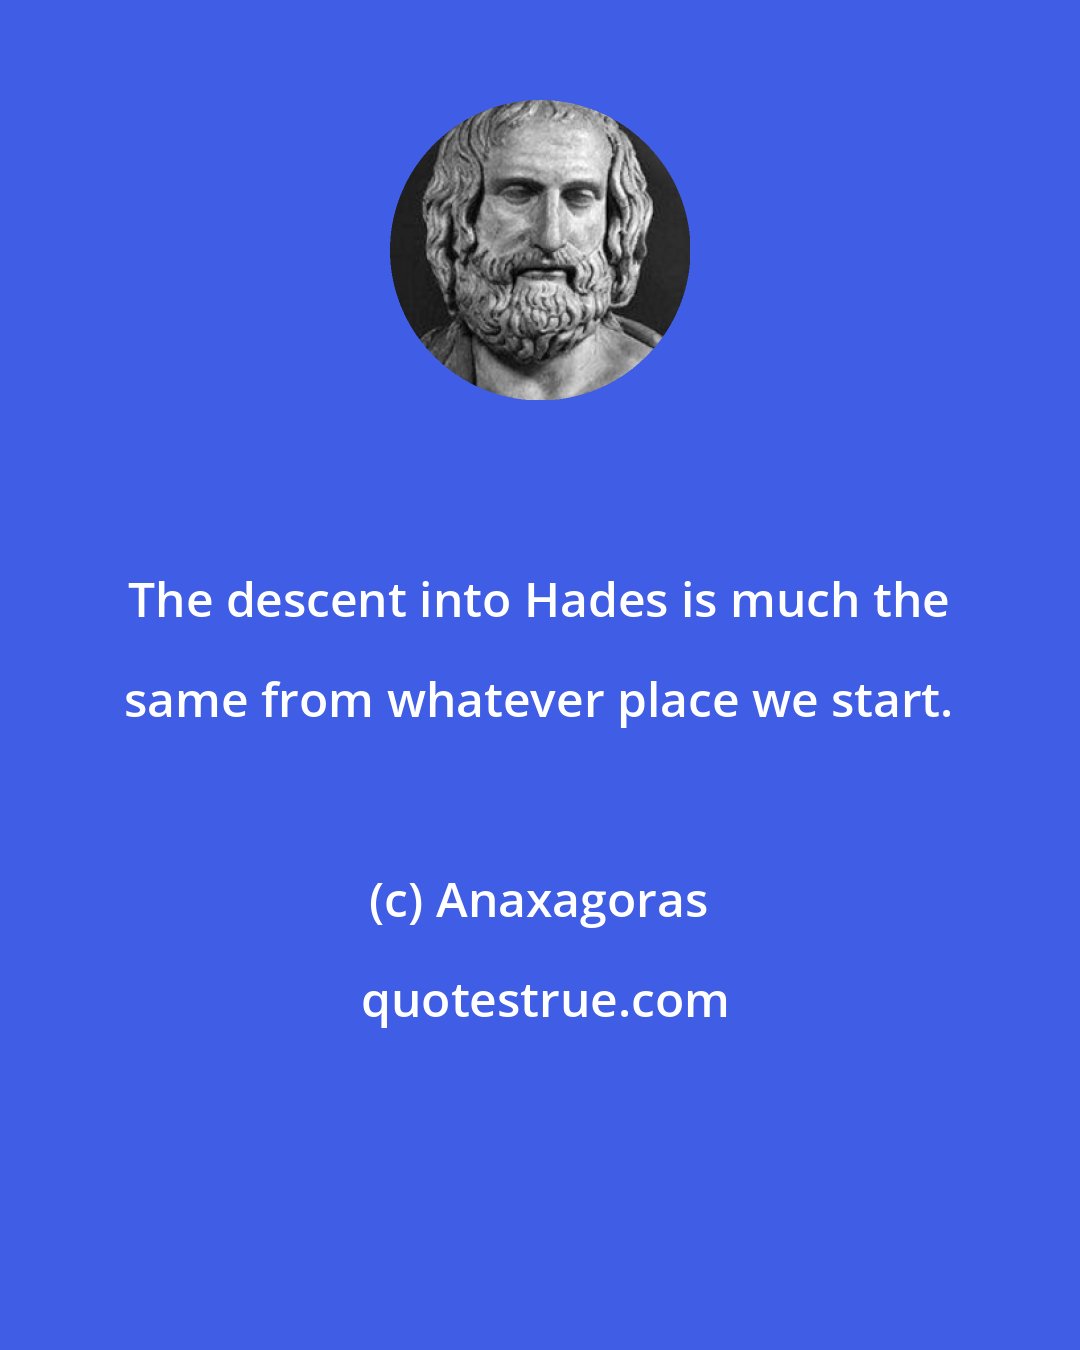 Anaxagoras: The descent into Hades is much the same from whatever place we start.